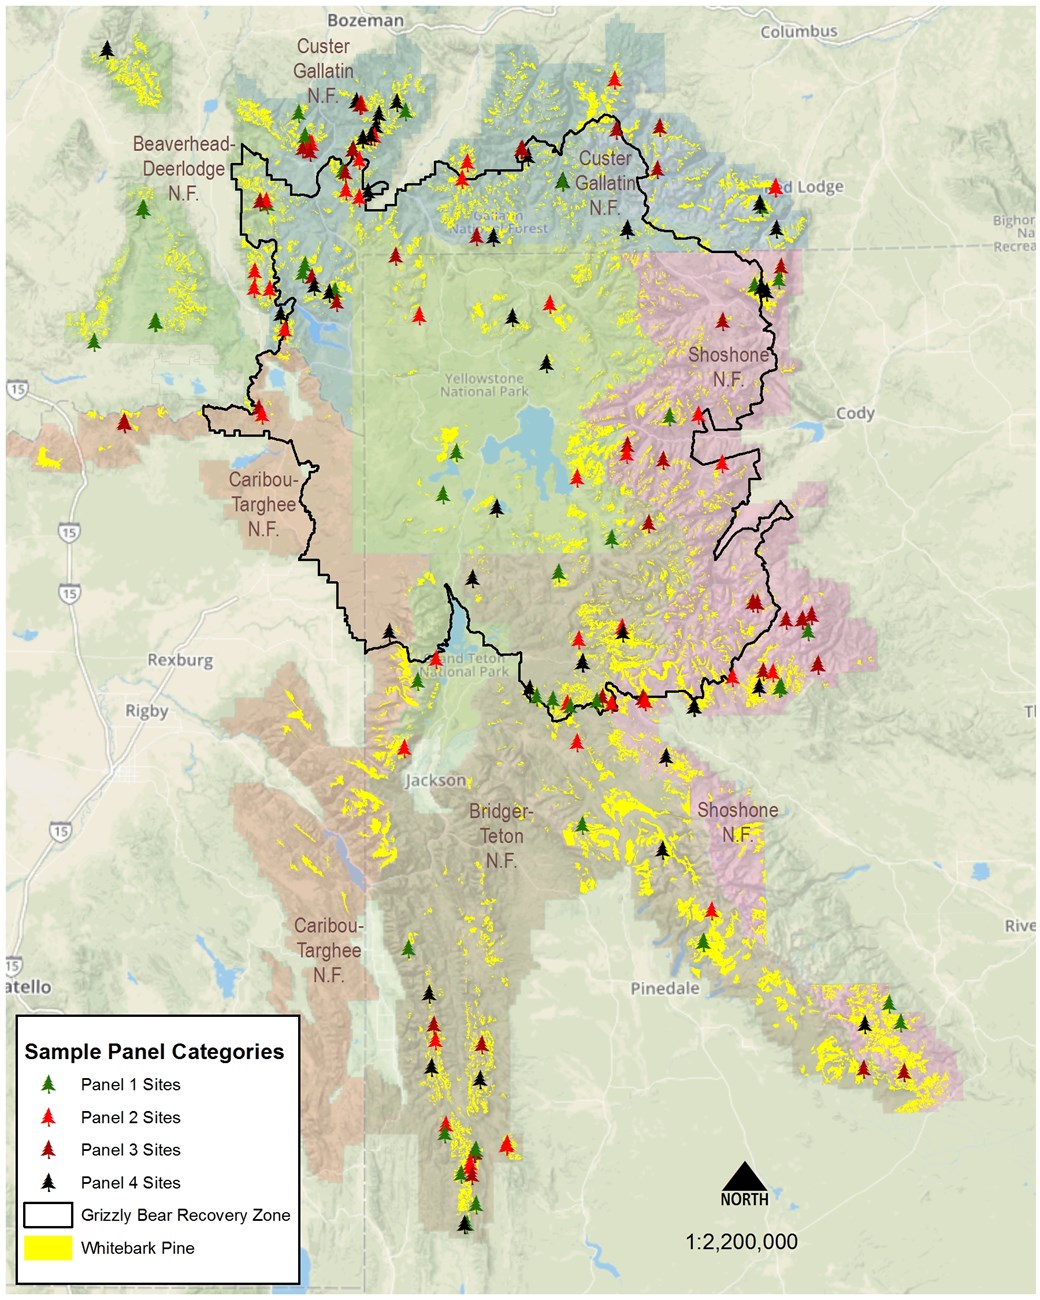 Map of the Greater Yellowstone Ecosystem, with whitebark pine sampling panels shown.